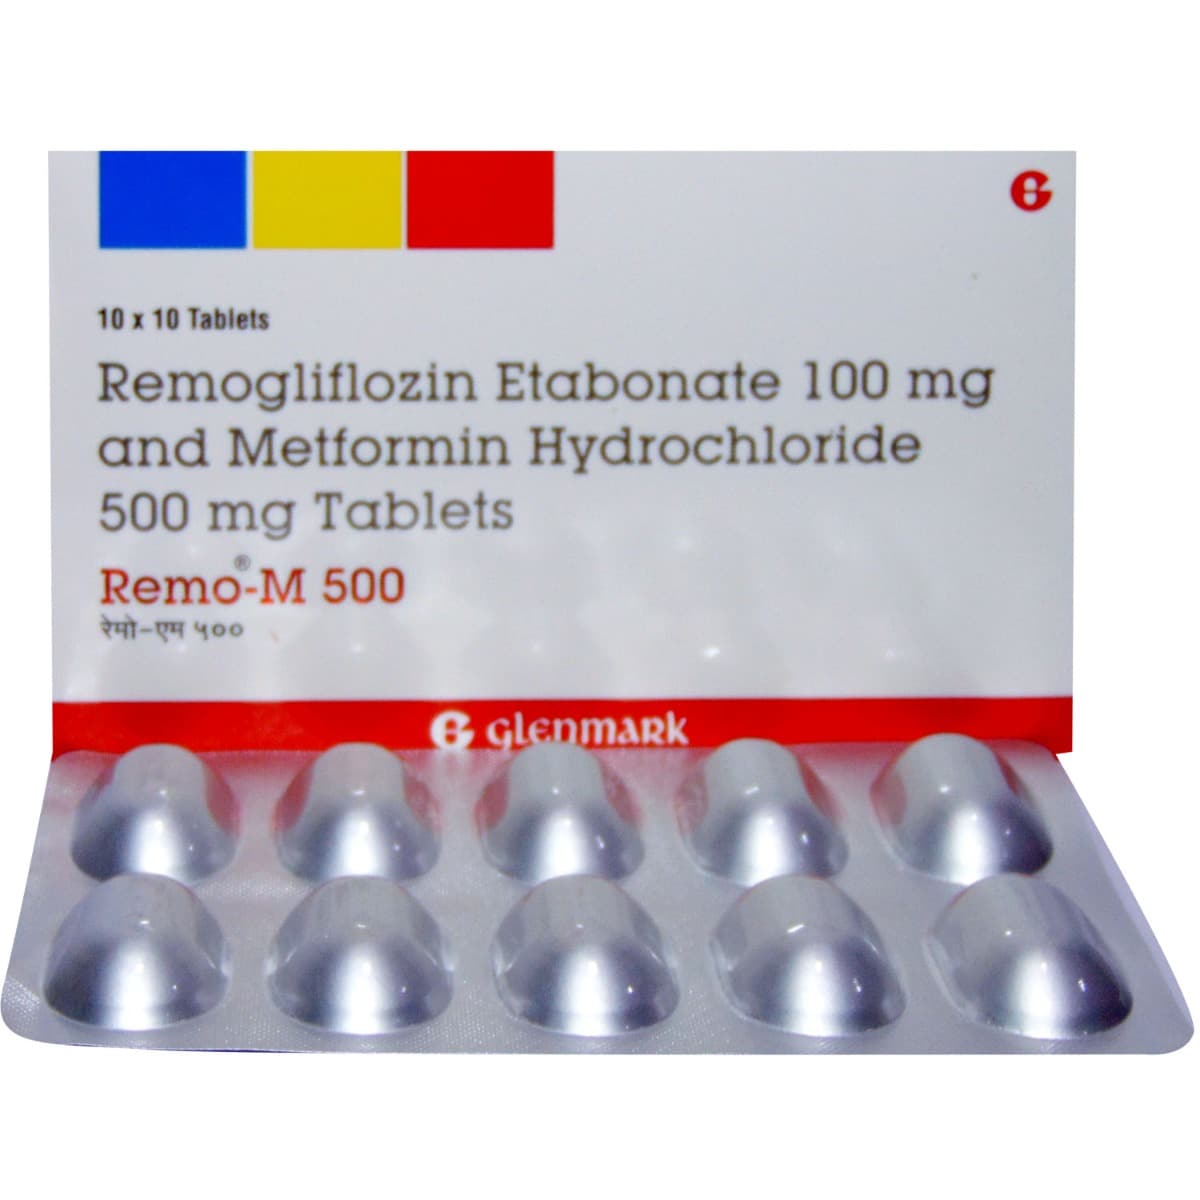 Remo-M 500 Tablet 10's Price, Uses, Side Effects, Composition ...